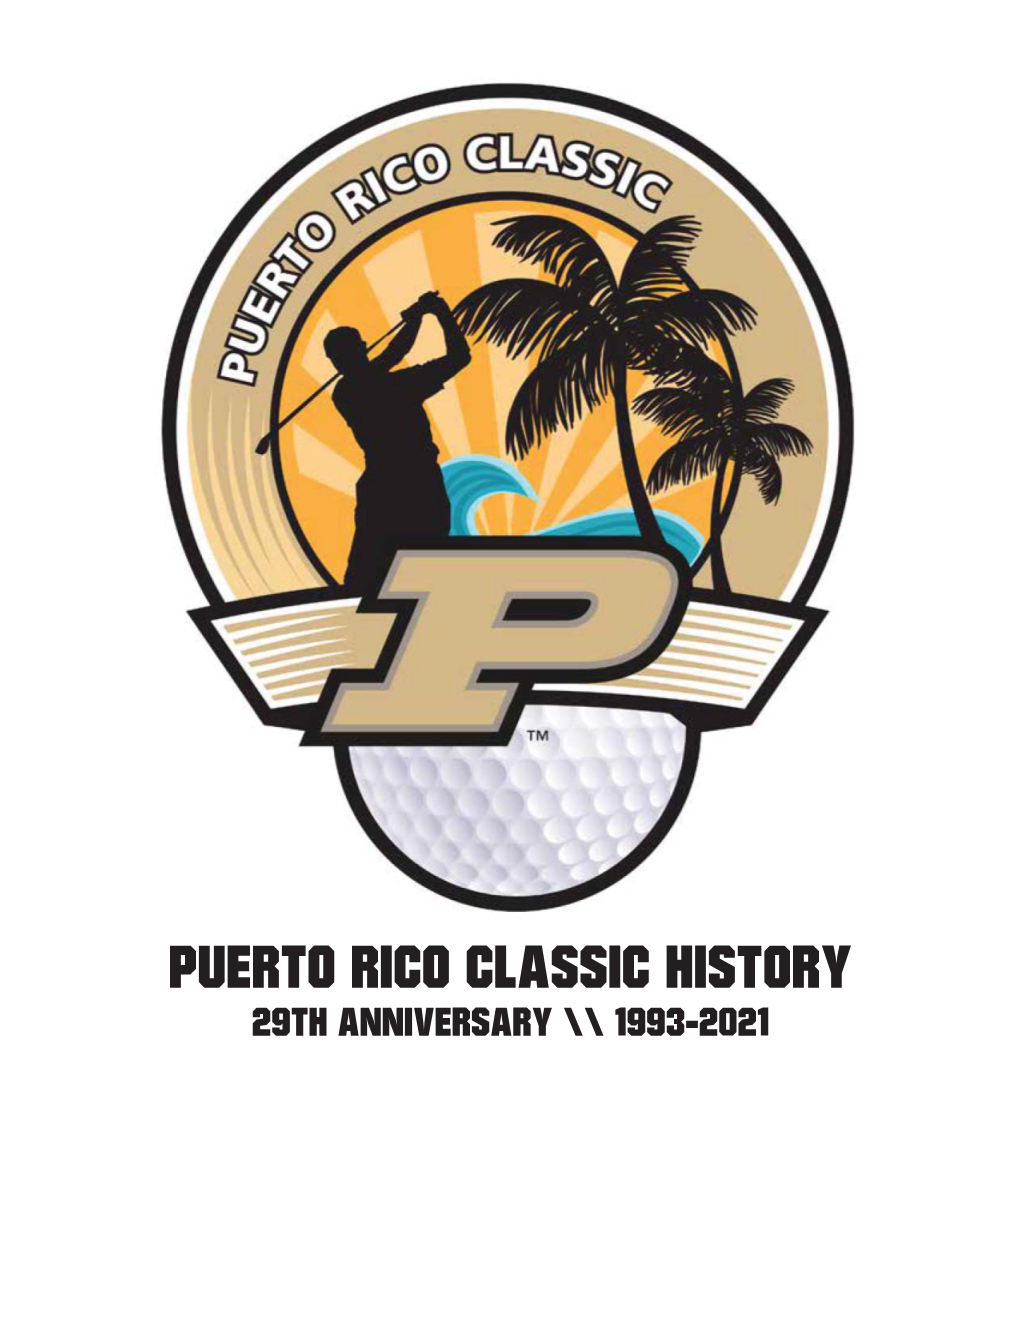 Puerto Rico Classic History.Indd